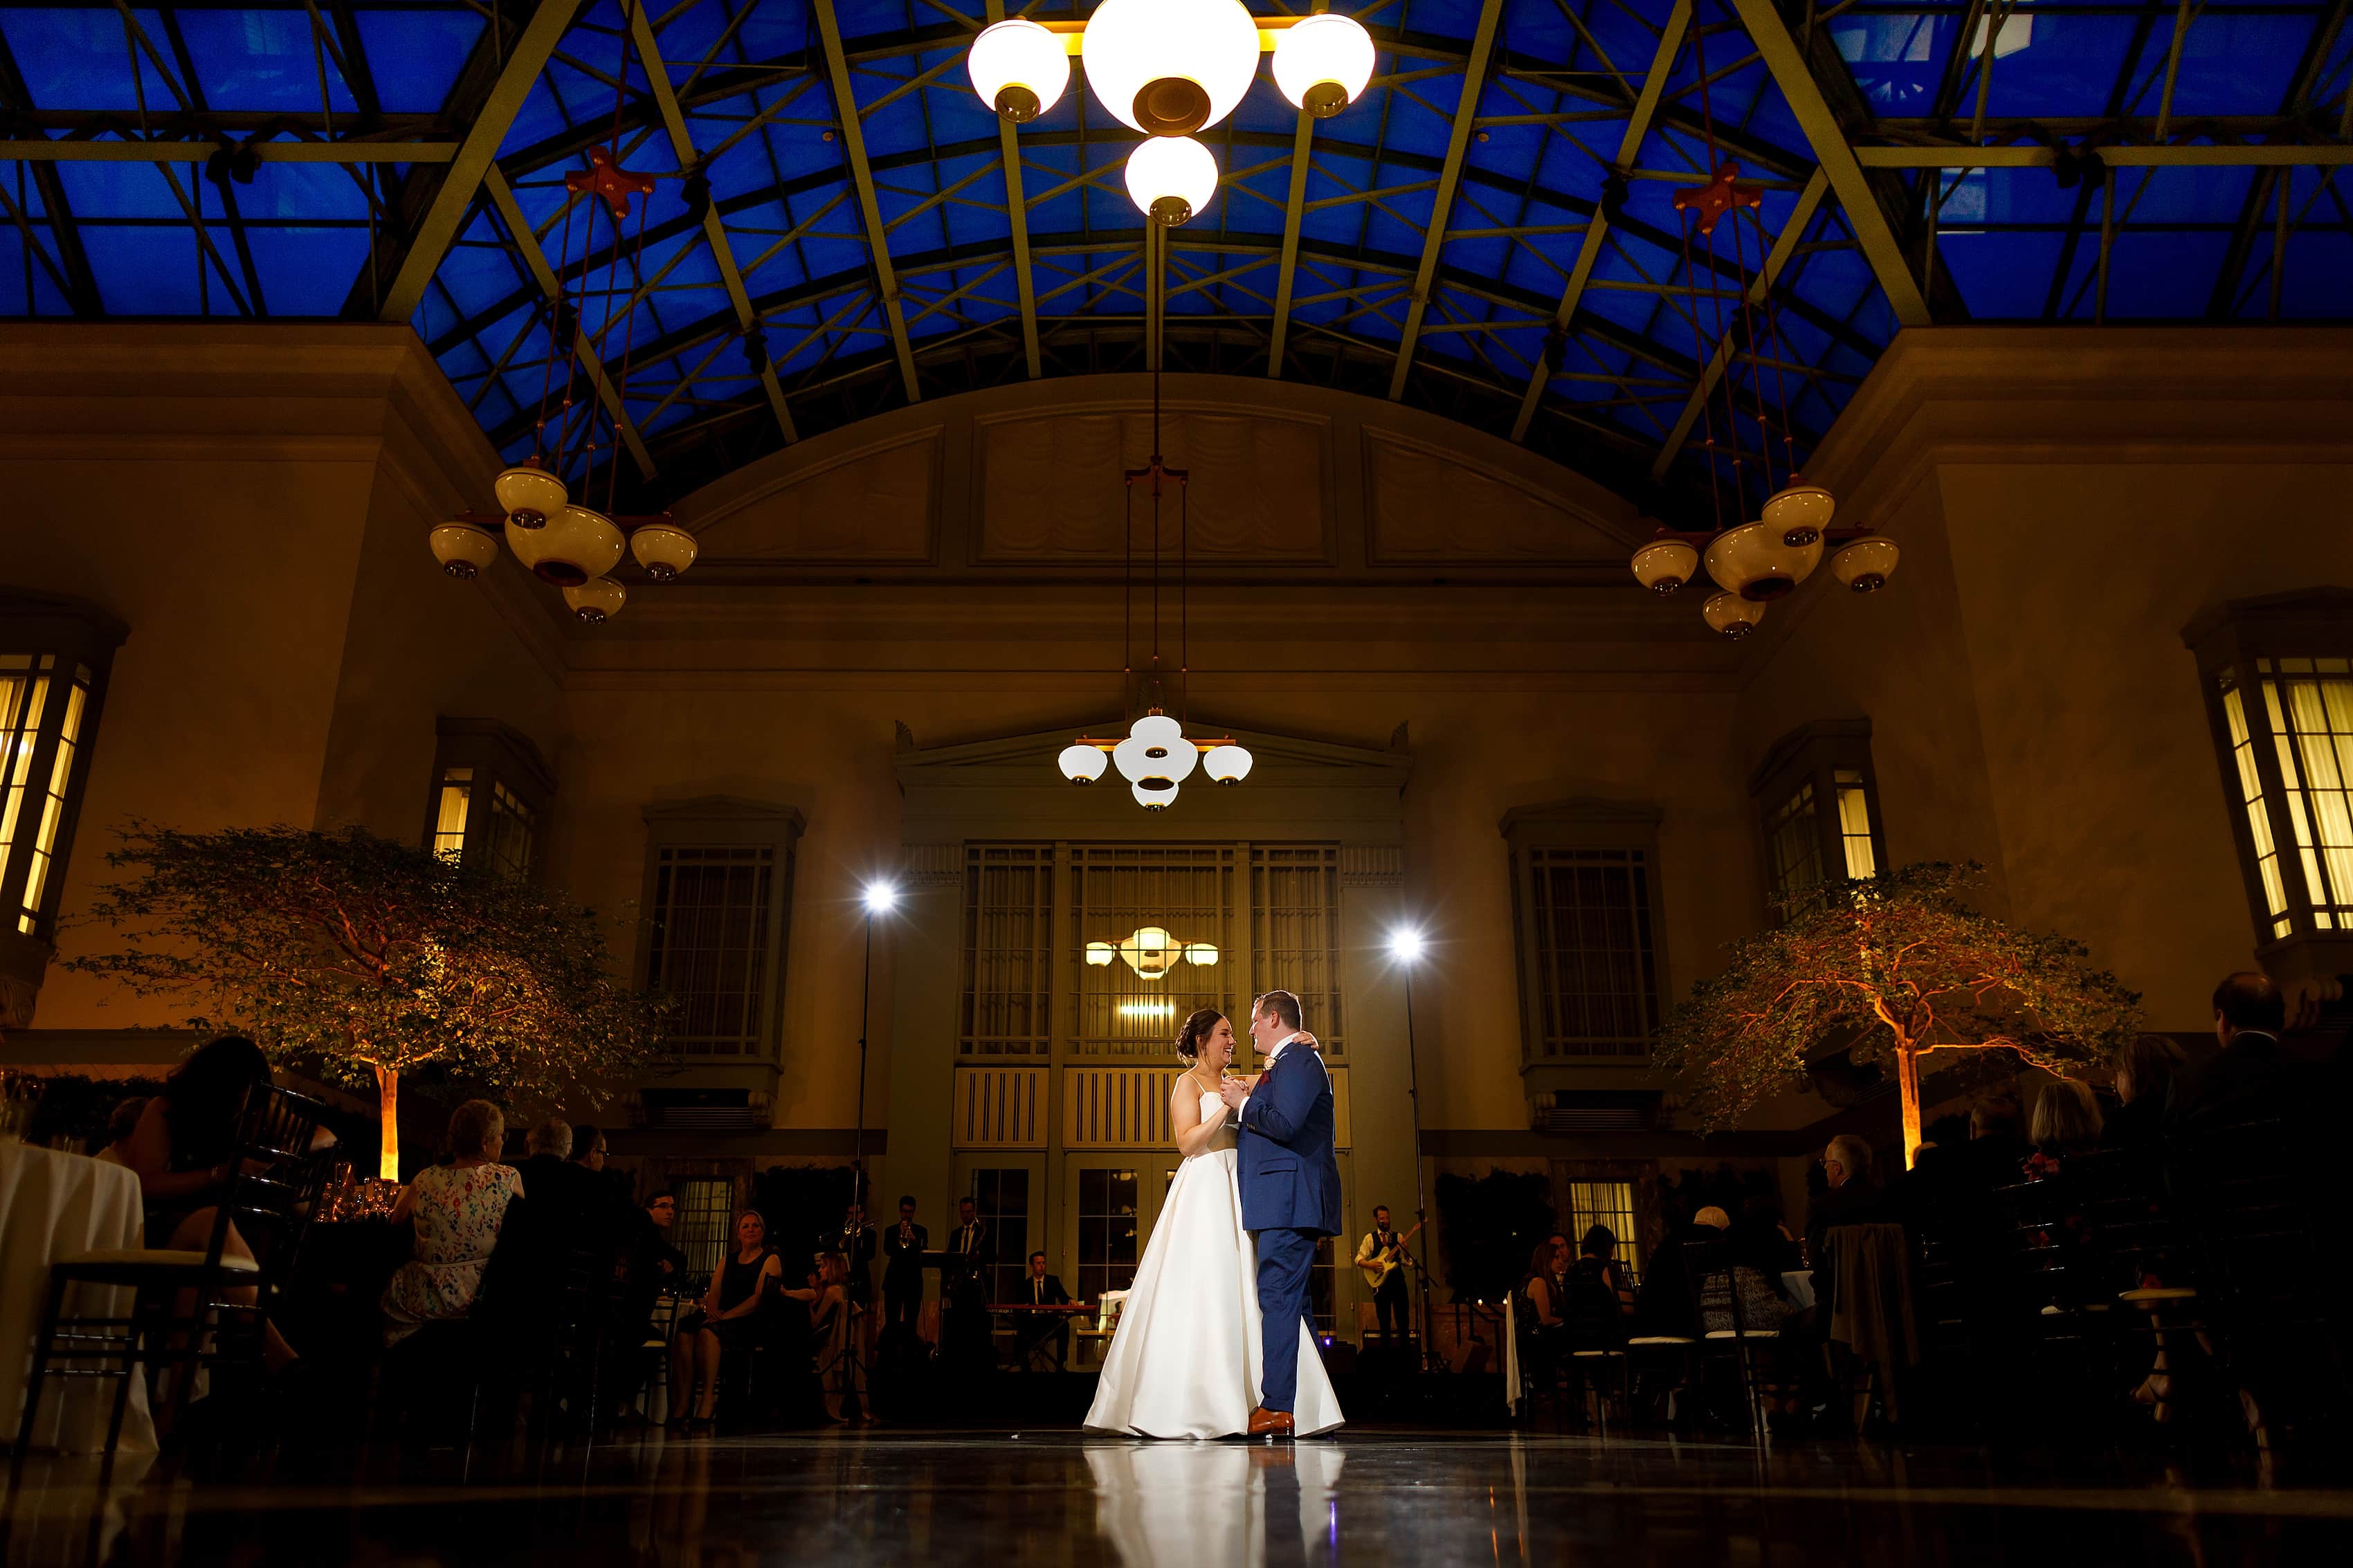 Bride and groom first dance during wedding reception at Harold Washington Library